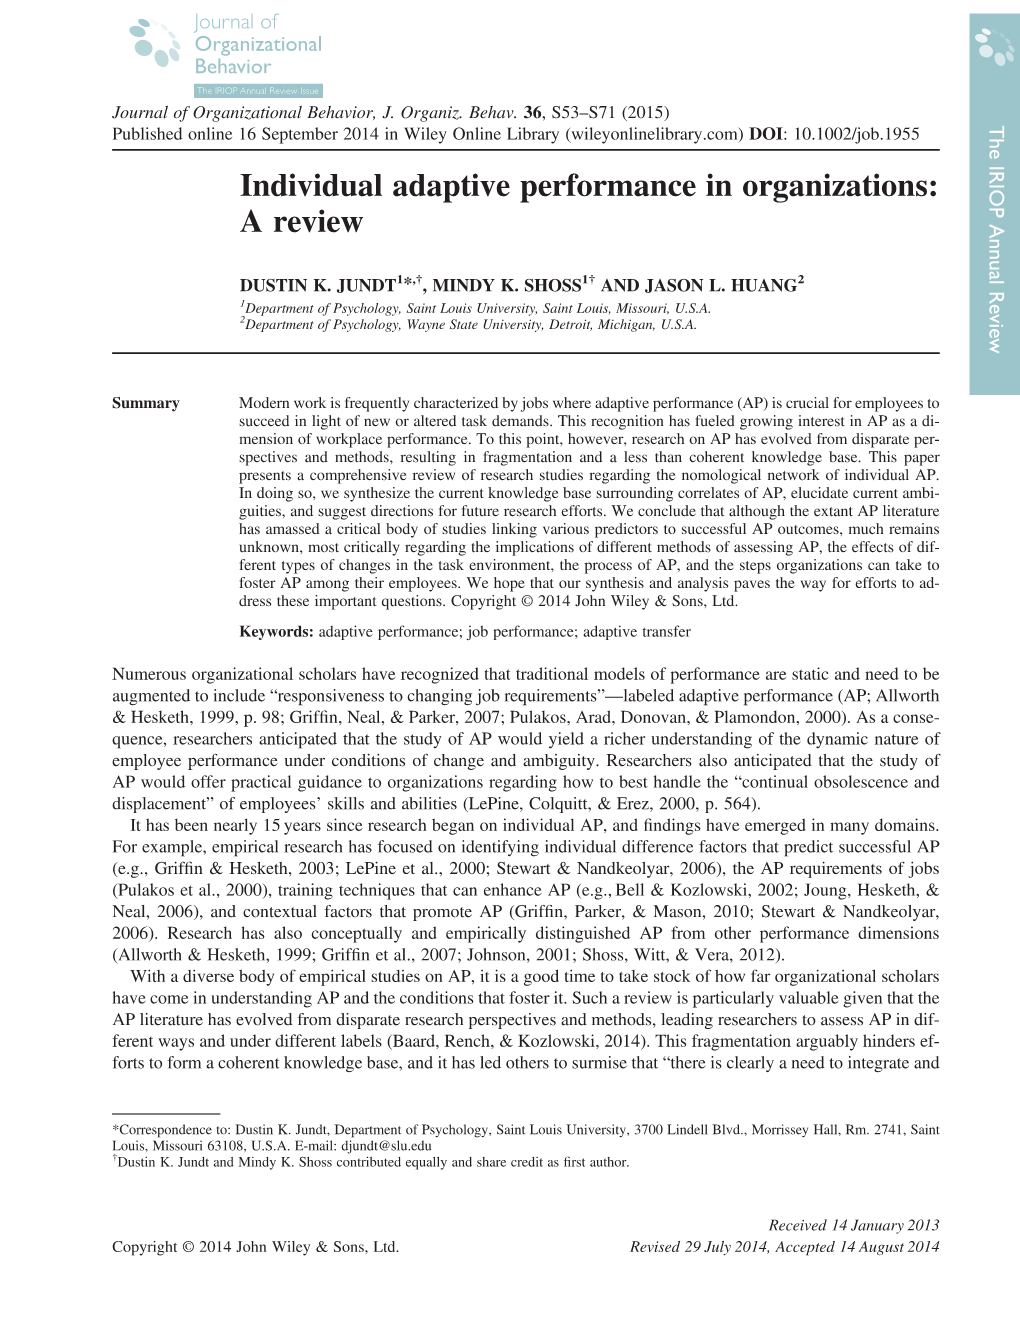 Individual Adaptive Performance in Organizations: a Review